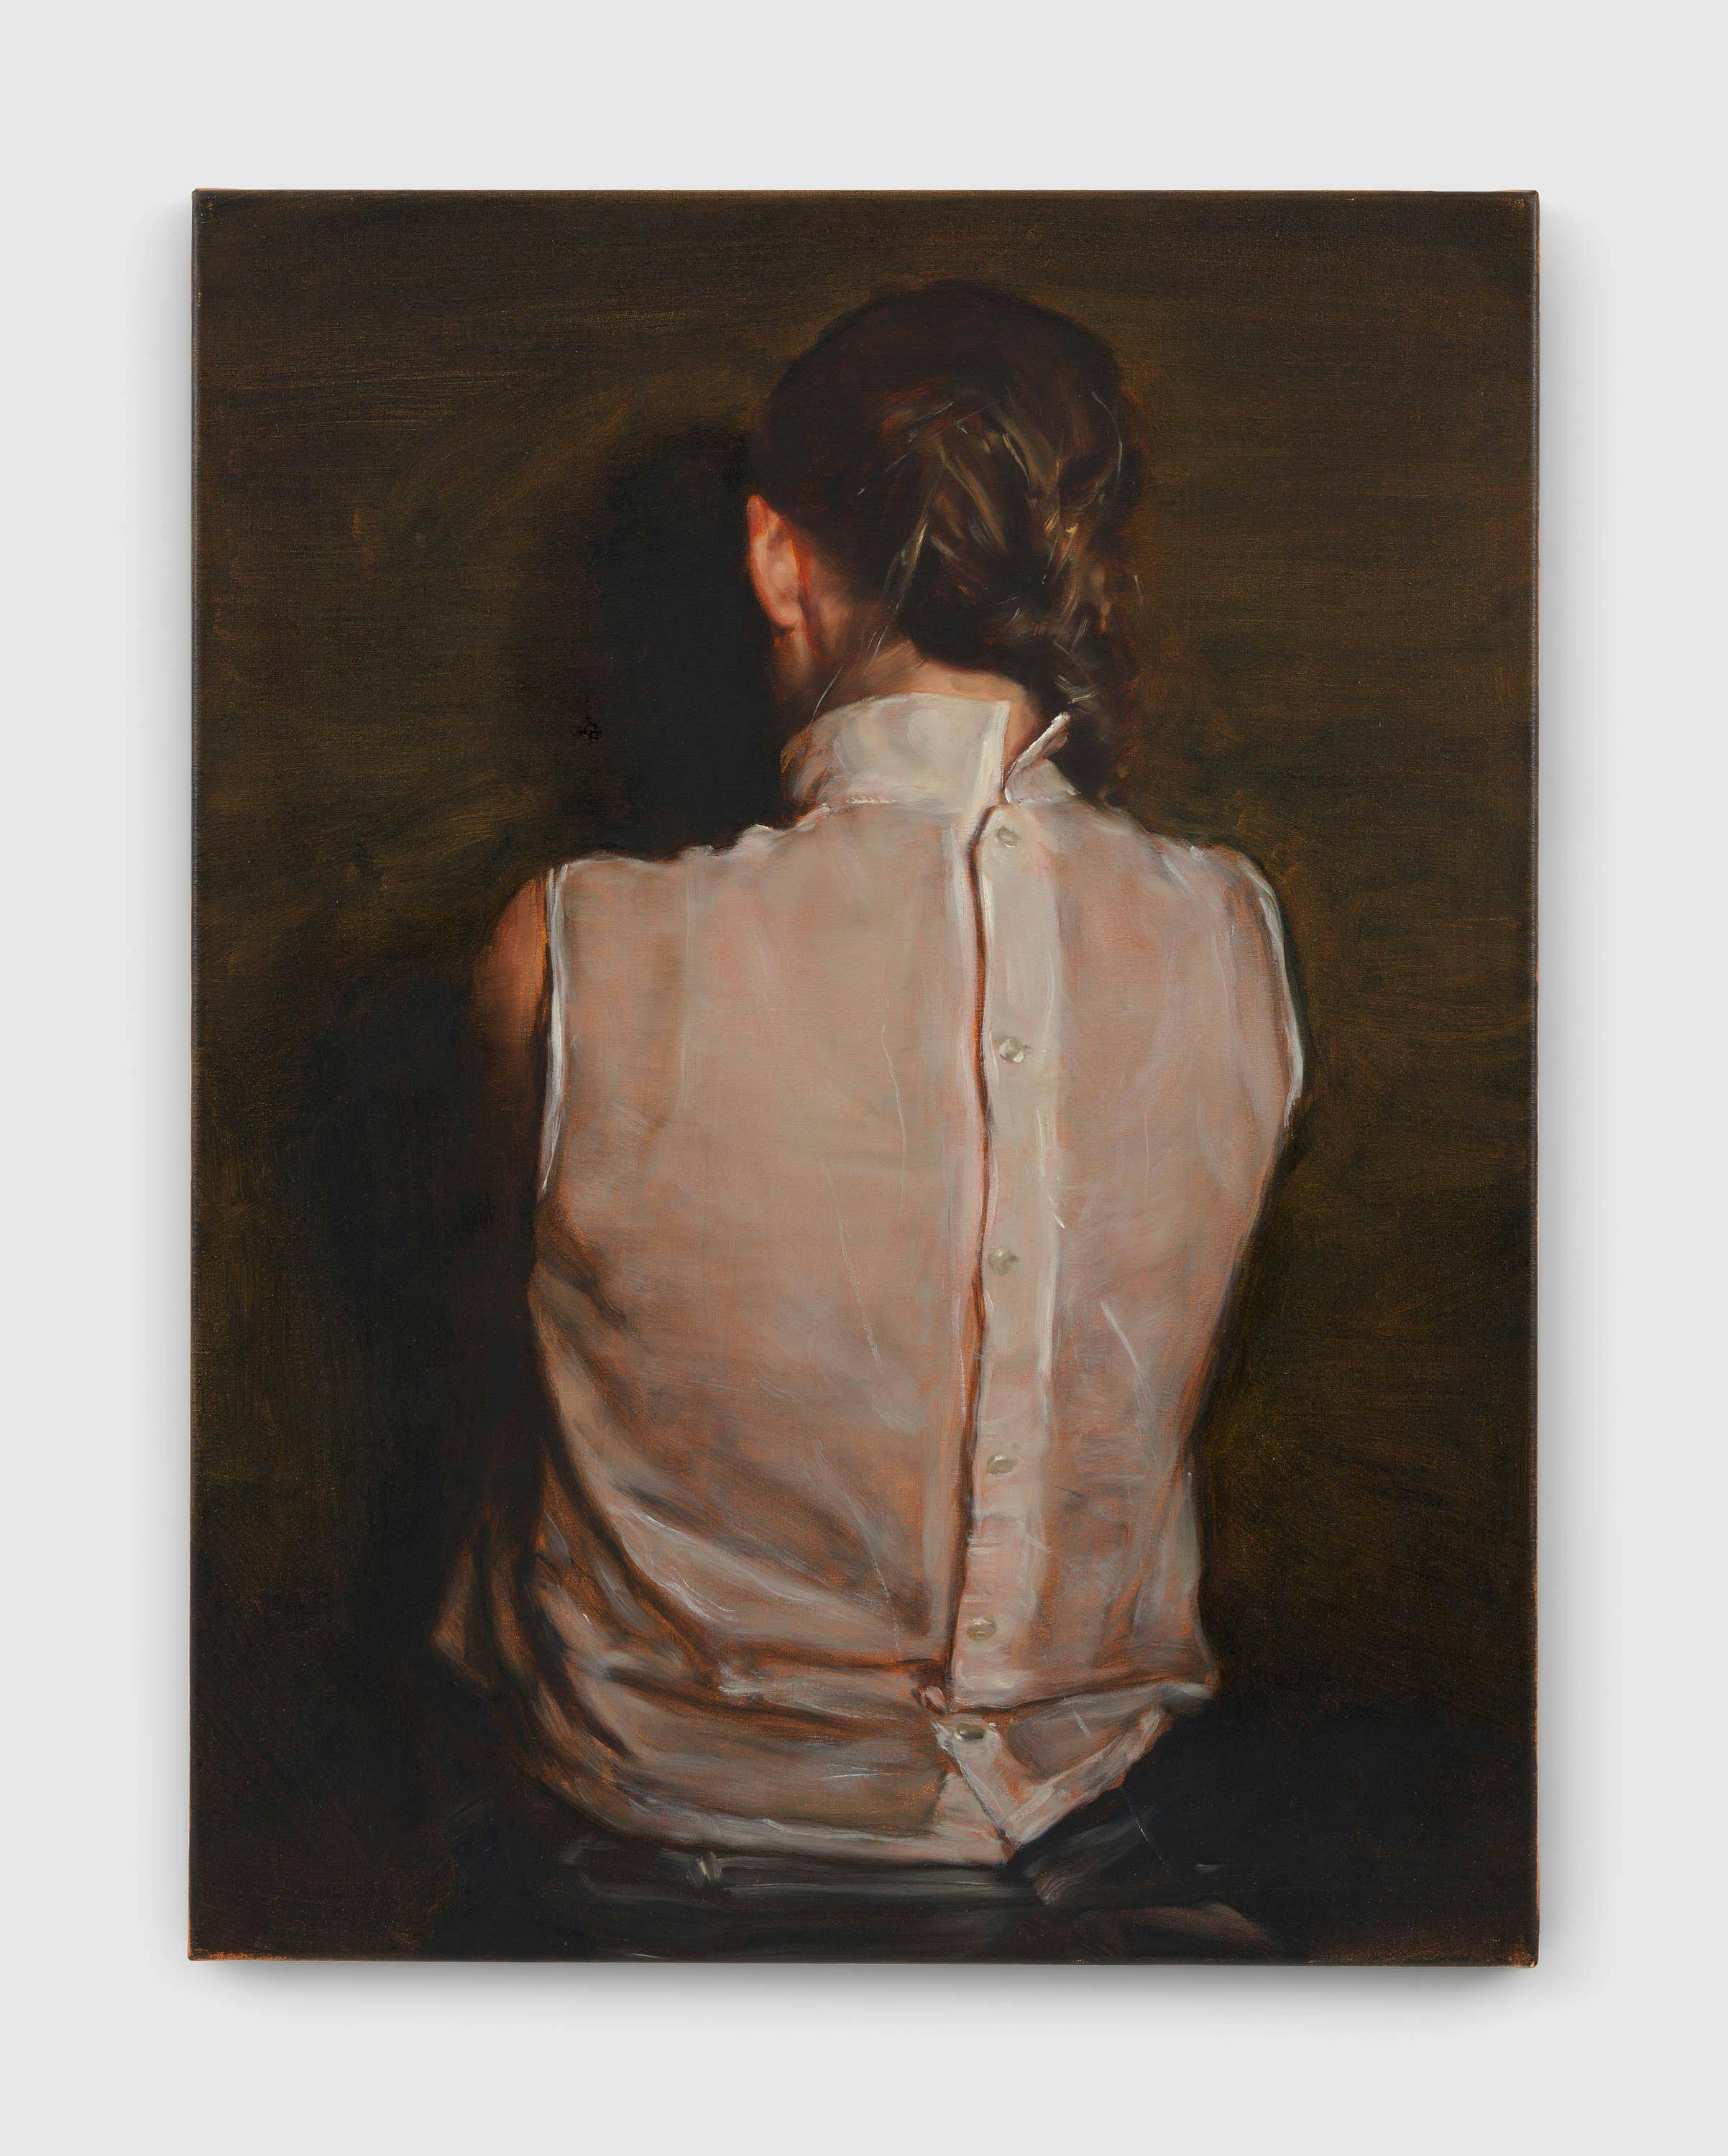 A painting by Michaël Borremans, titled The Ear (II), dated 2011.